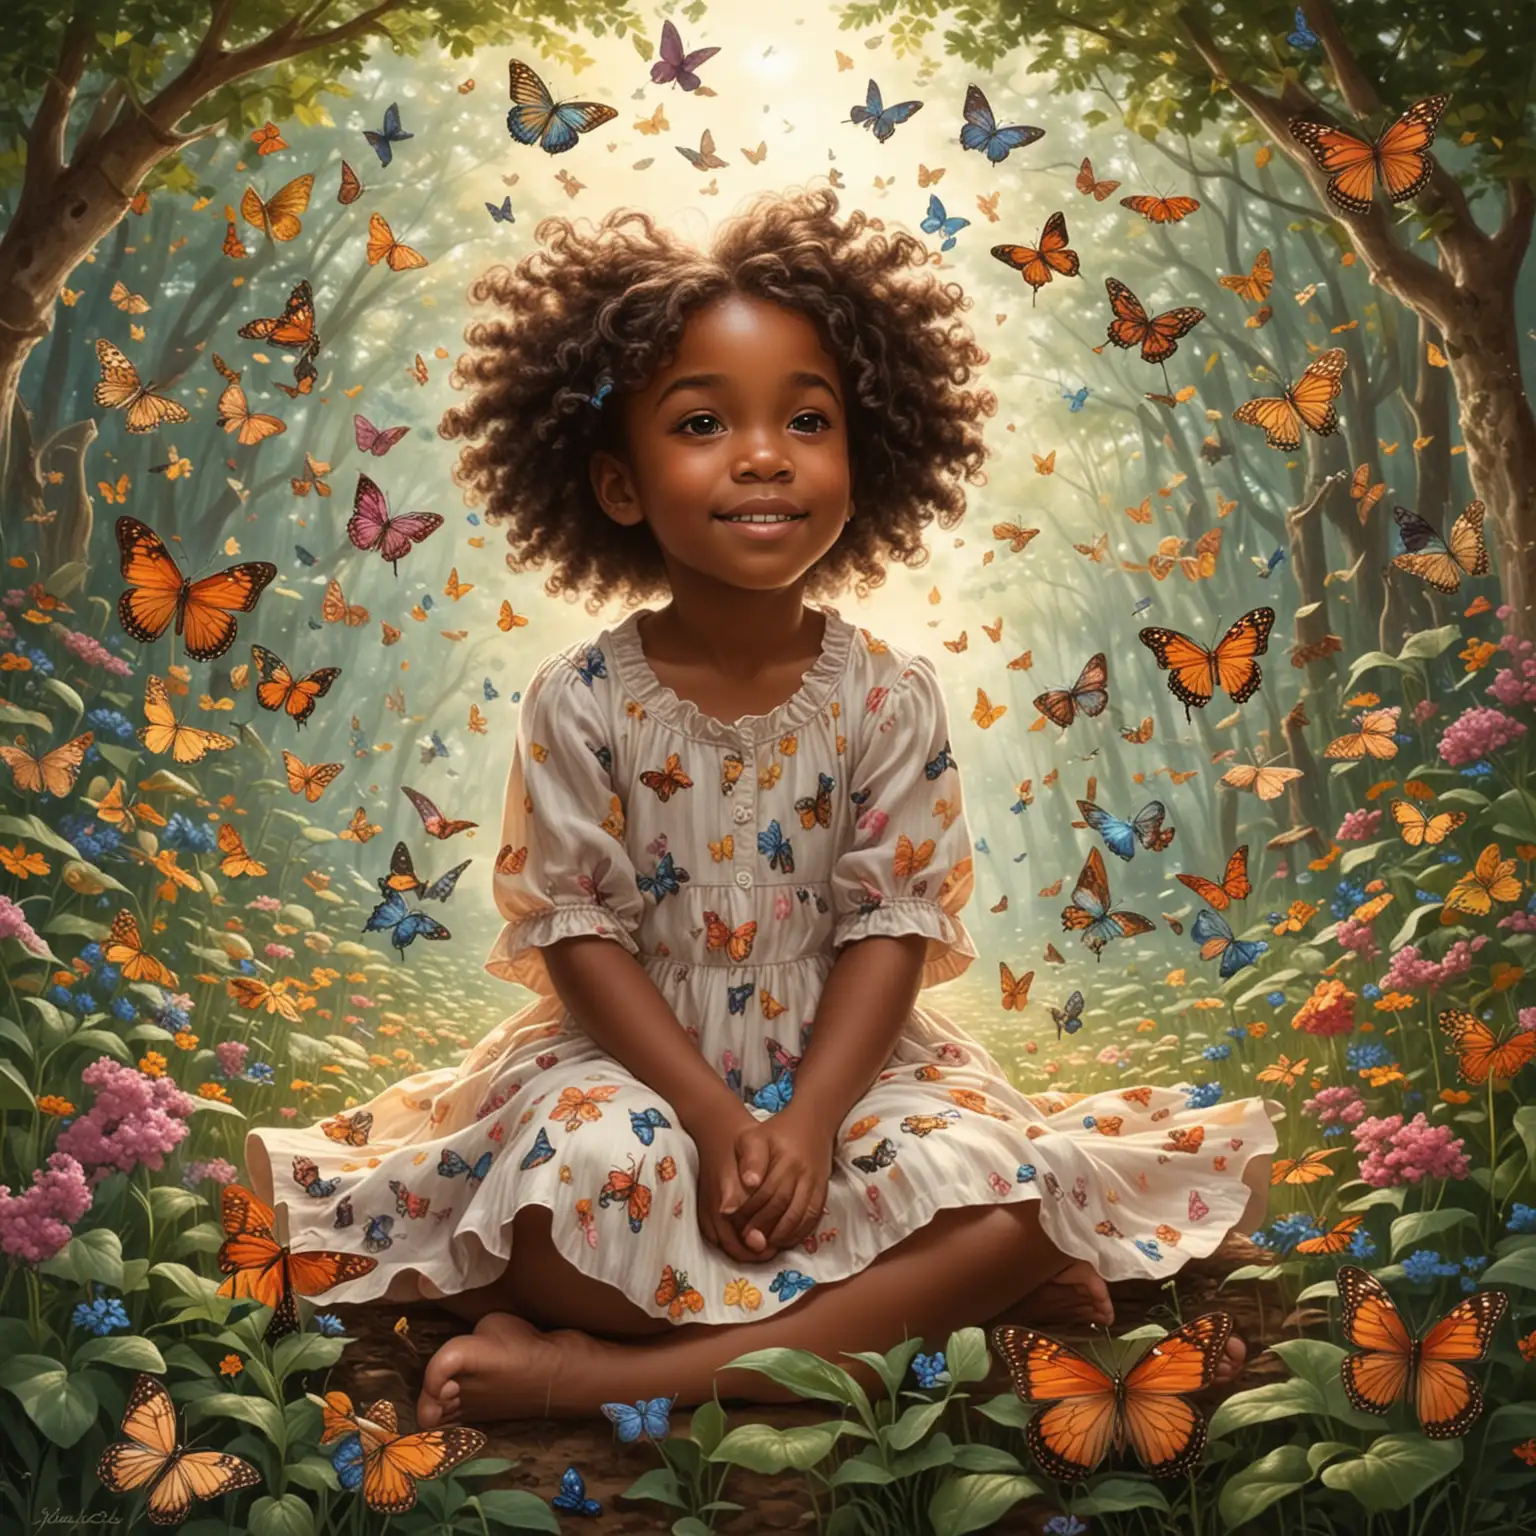 AfricanAmerican Girl Playing with Butterflies in Two Worlds